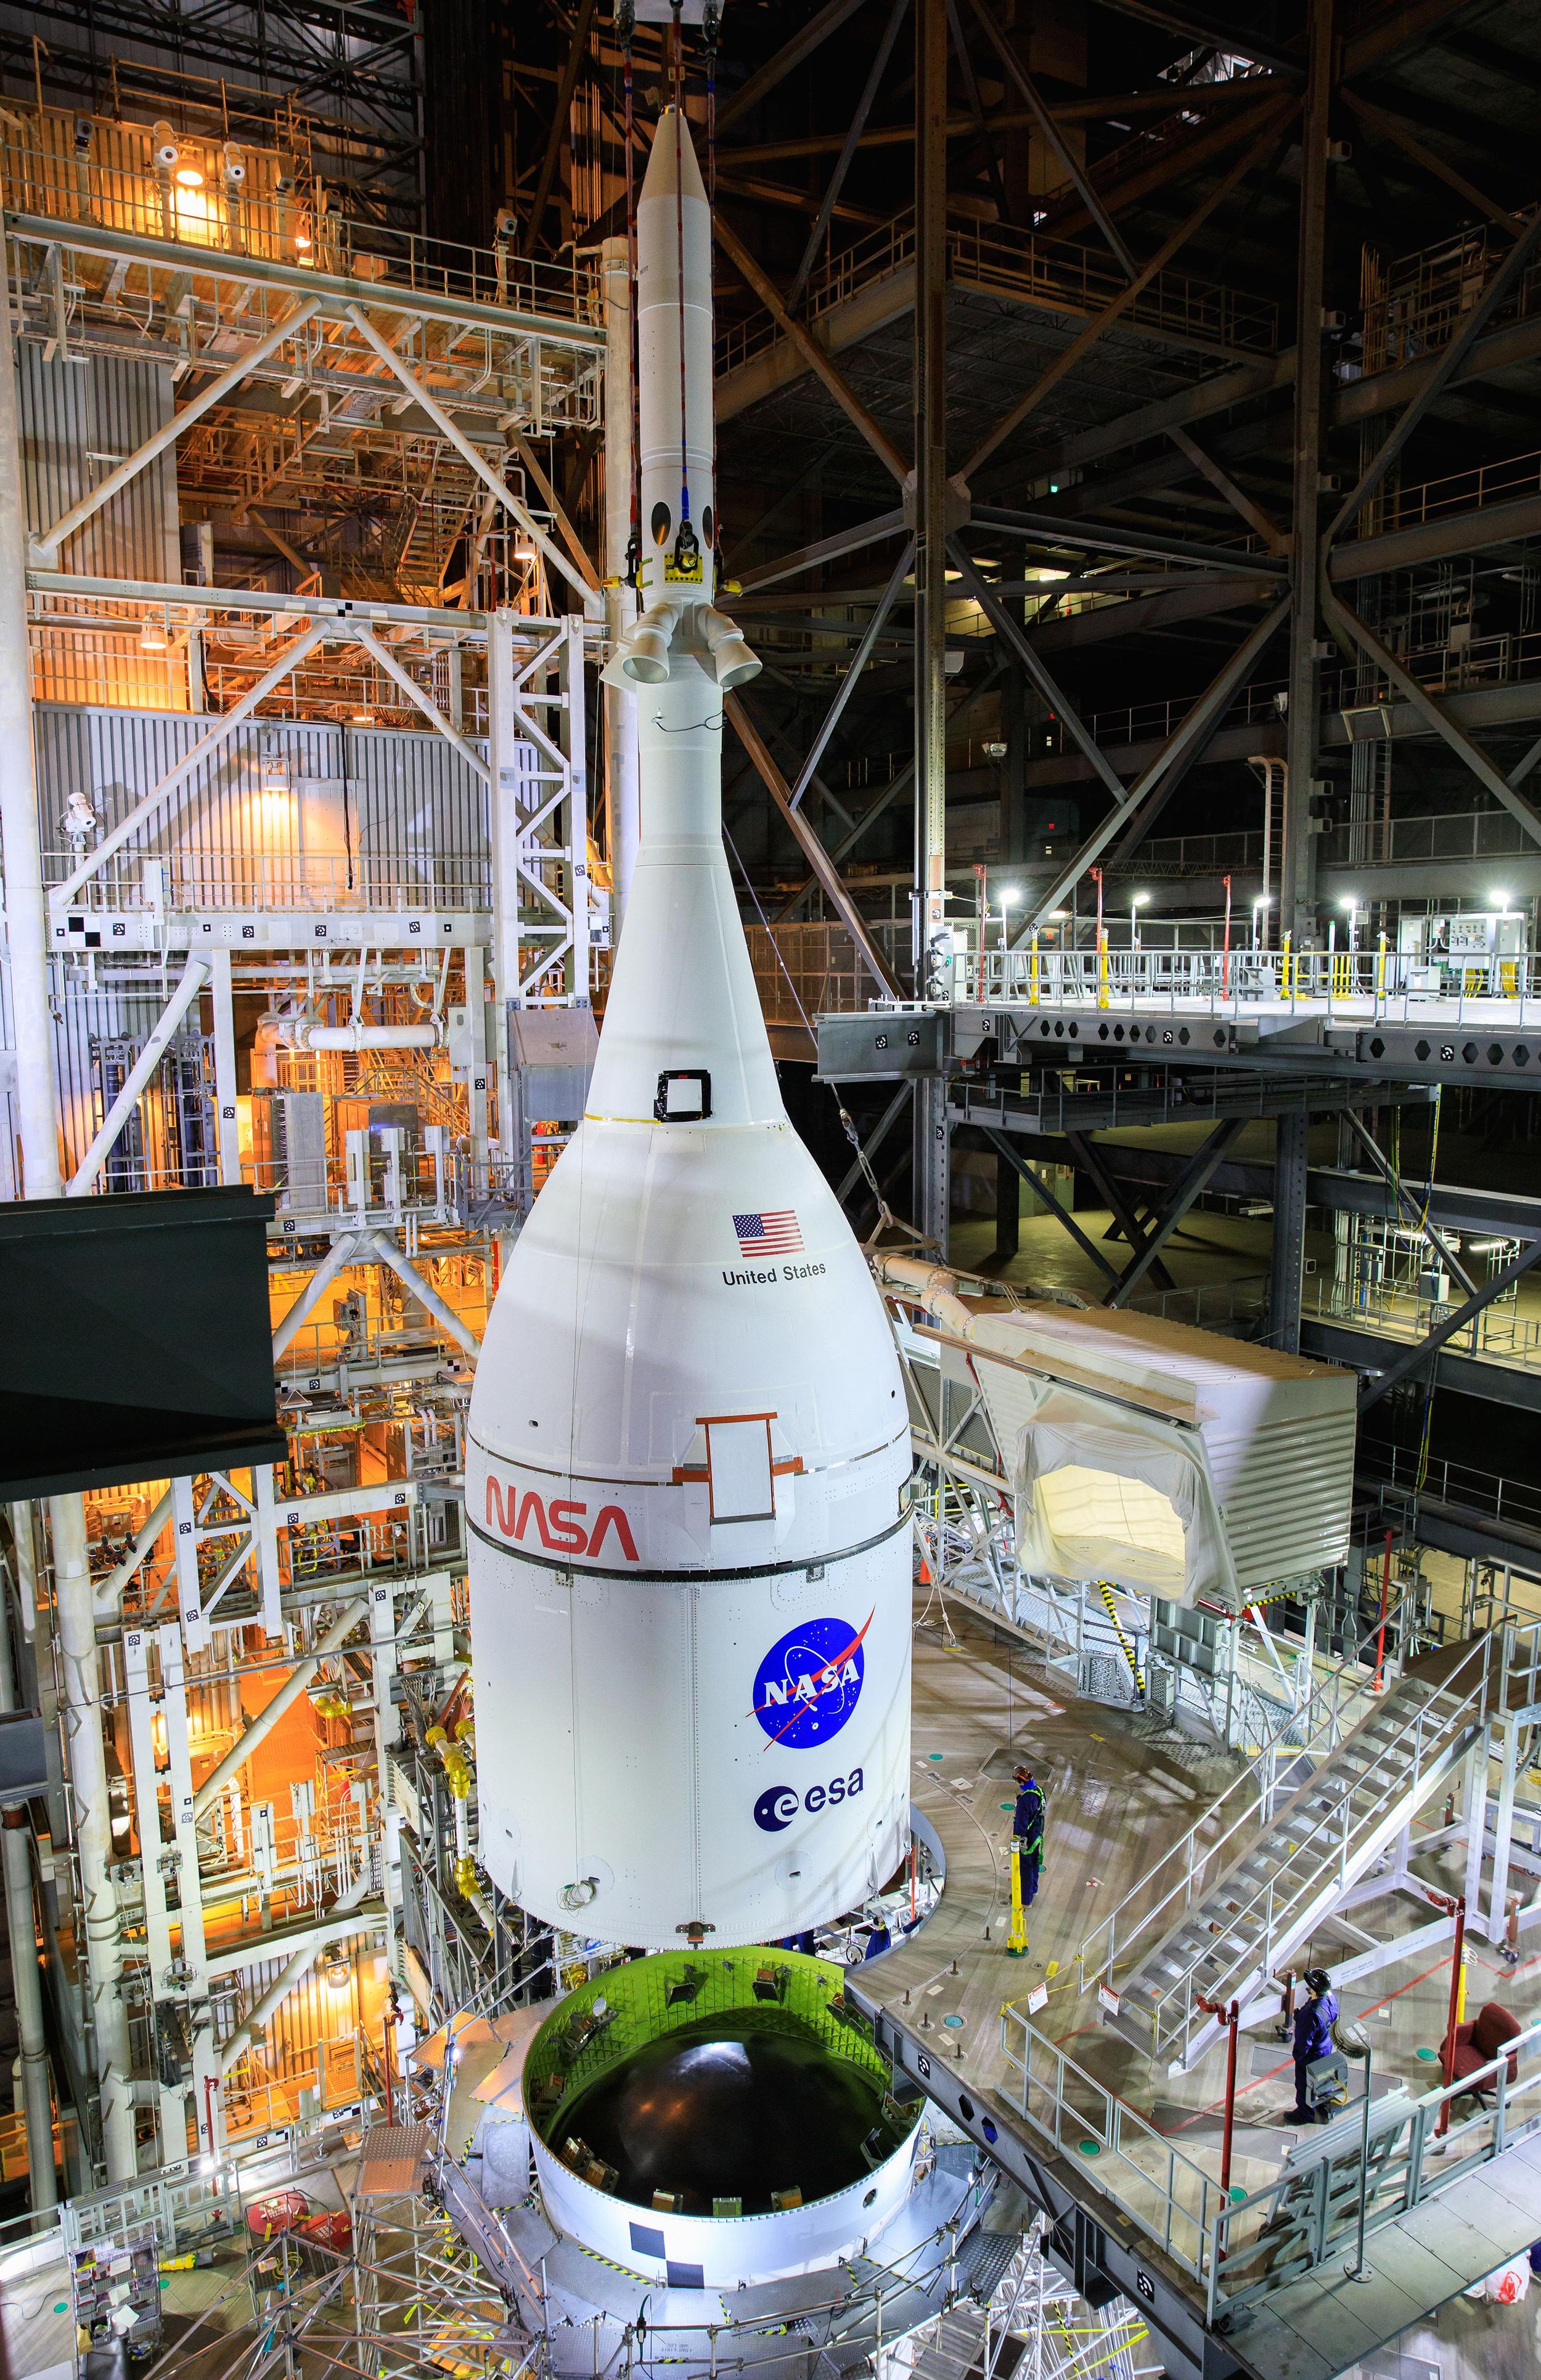 Photograph shows a bullet-shaped spacecraft suspended just above the top of the Space Launch System booster, inside a cavernous building.